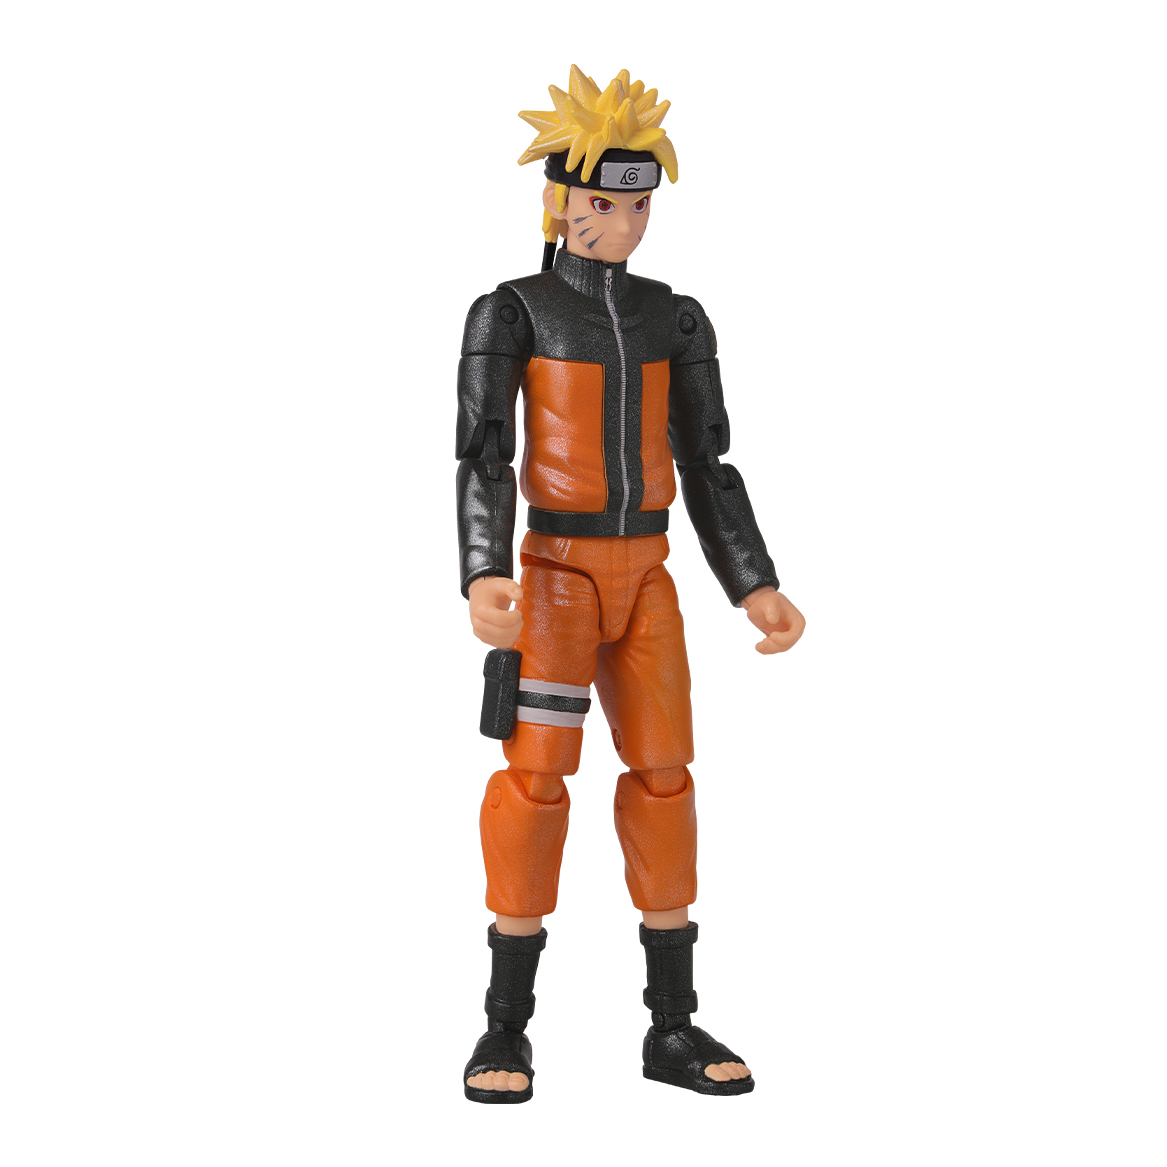 Exclusive ANIME HEROES-NARUTO RIVAL PACK  limited time Special Price for Black Friday[Jan 2022 Delivery]